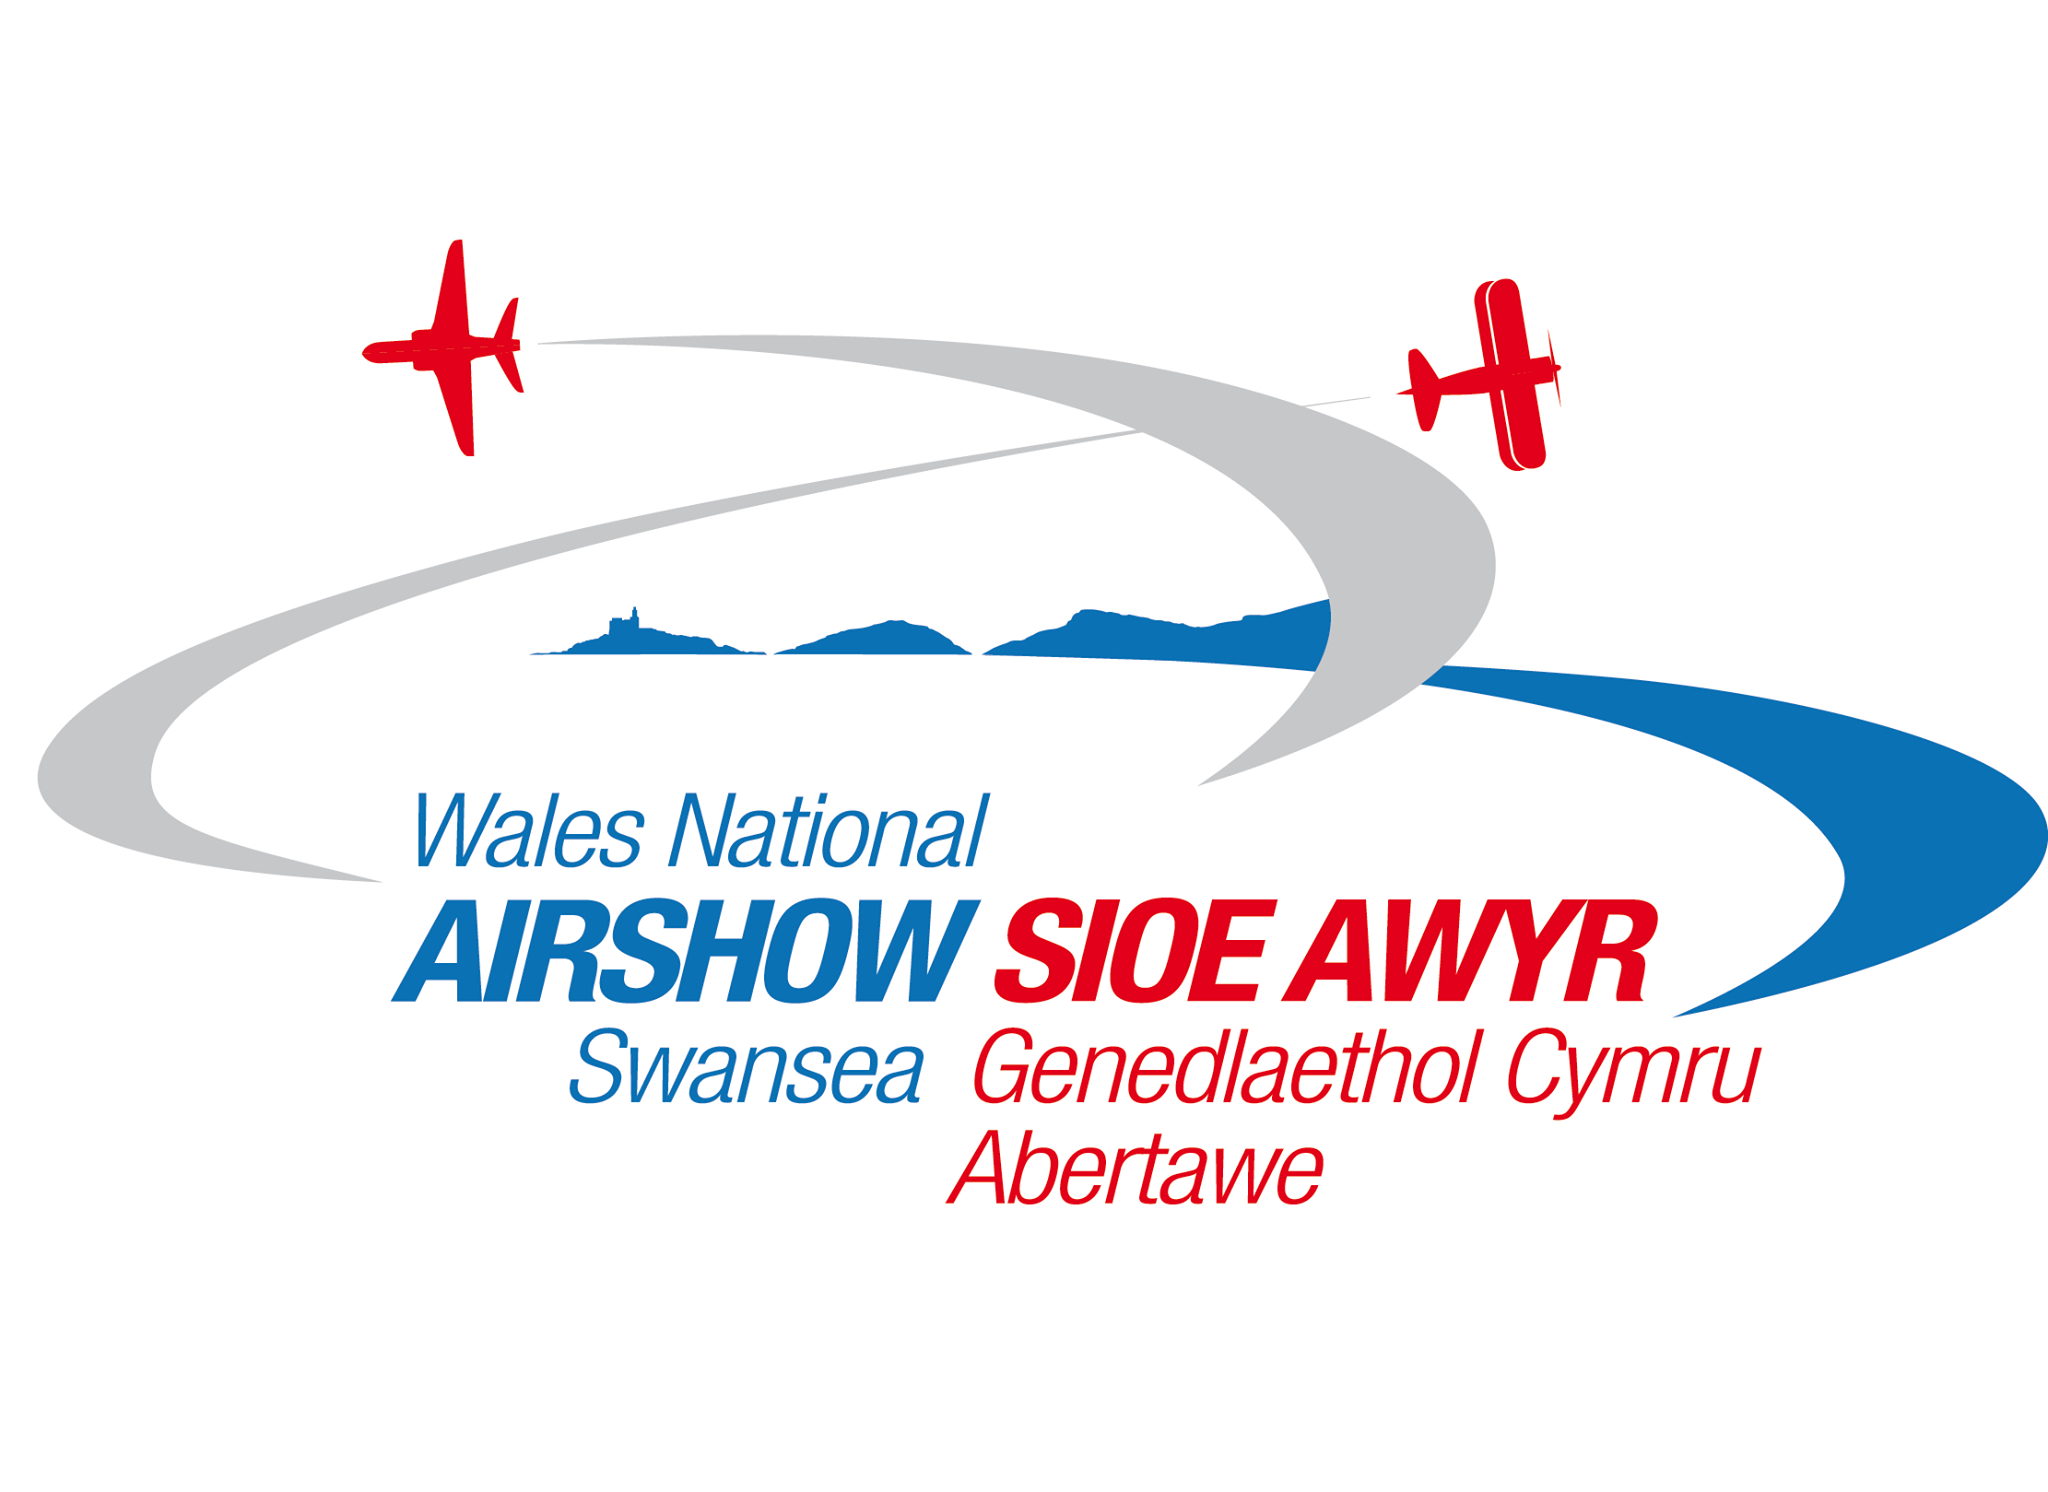 Wales National Airshow